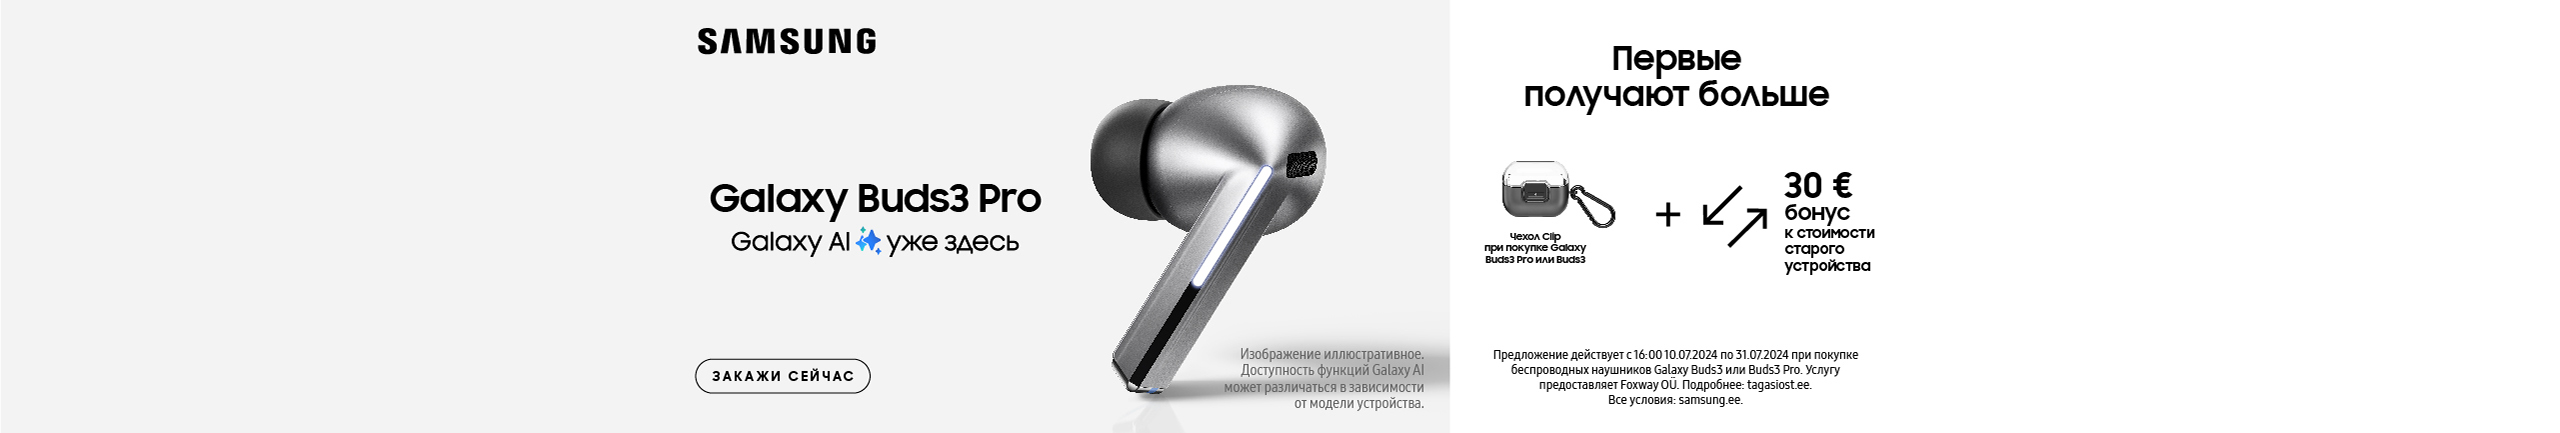 Buy Samsung Galaxy Buds 3 or Buds 3 Pro and get a Clip case as a gift!